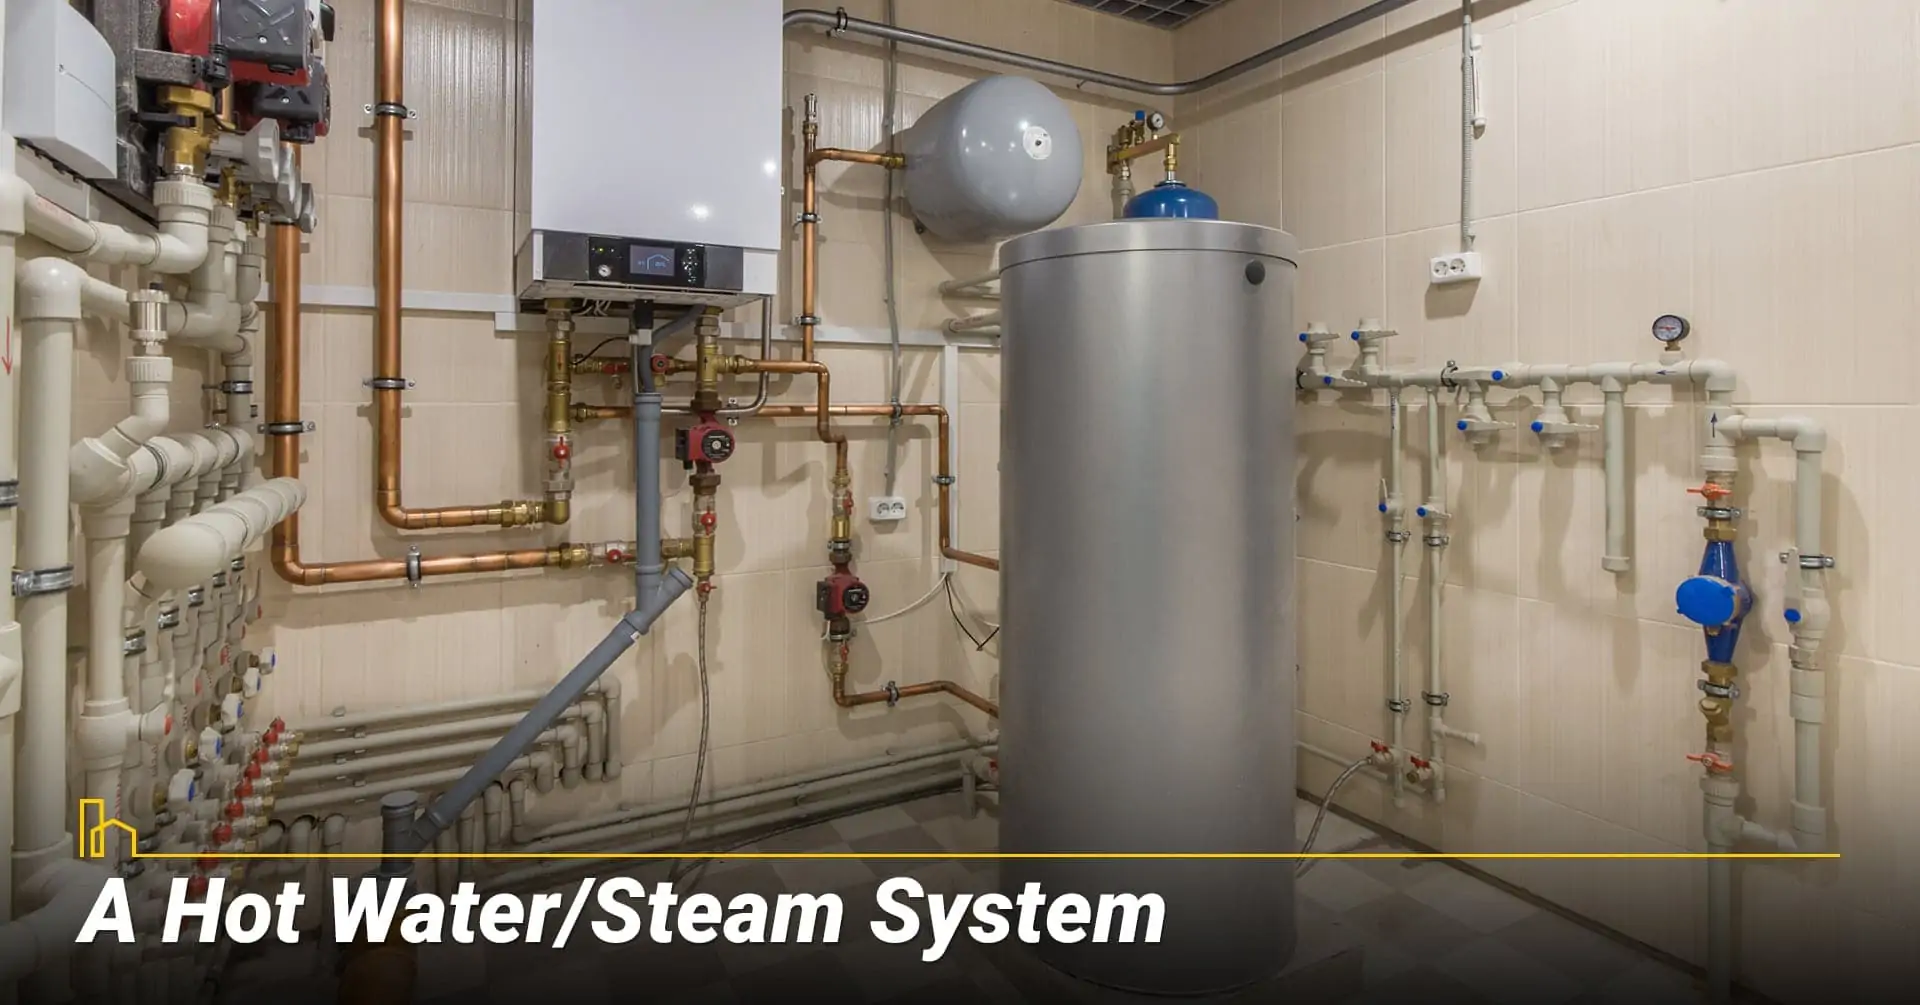 A Hot Water/Steam System, heat your home with hot water system